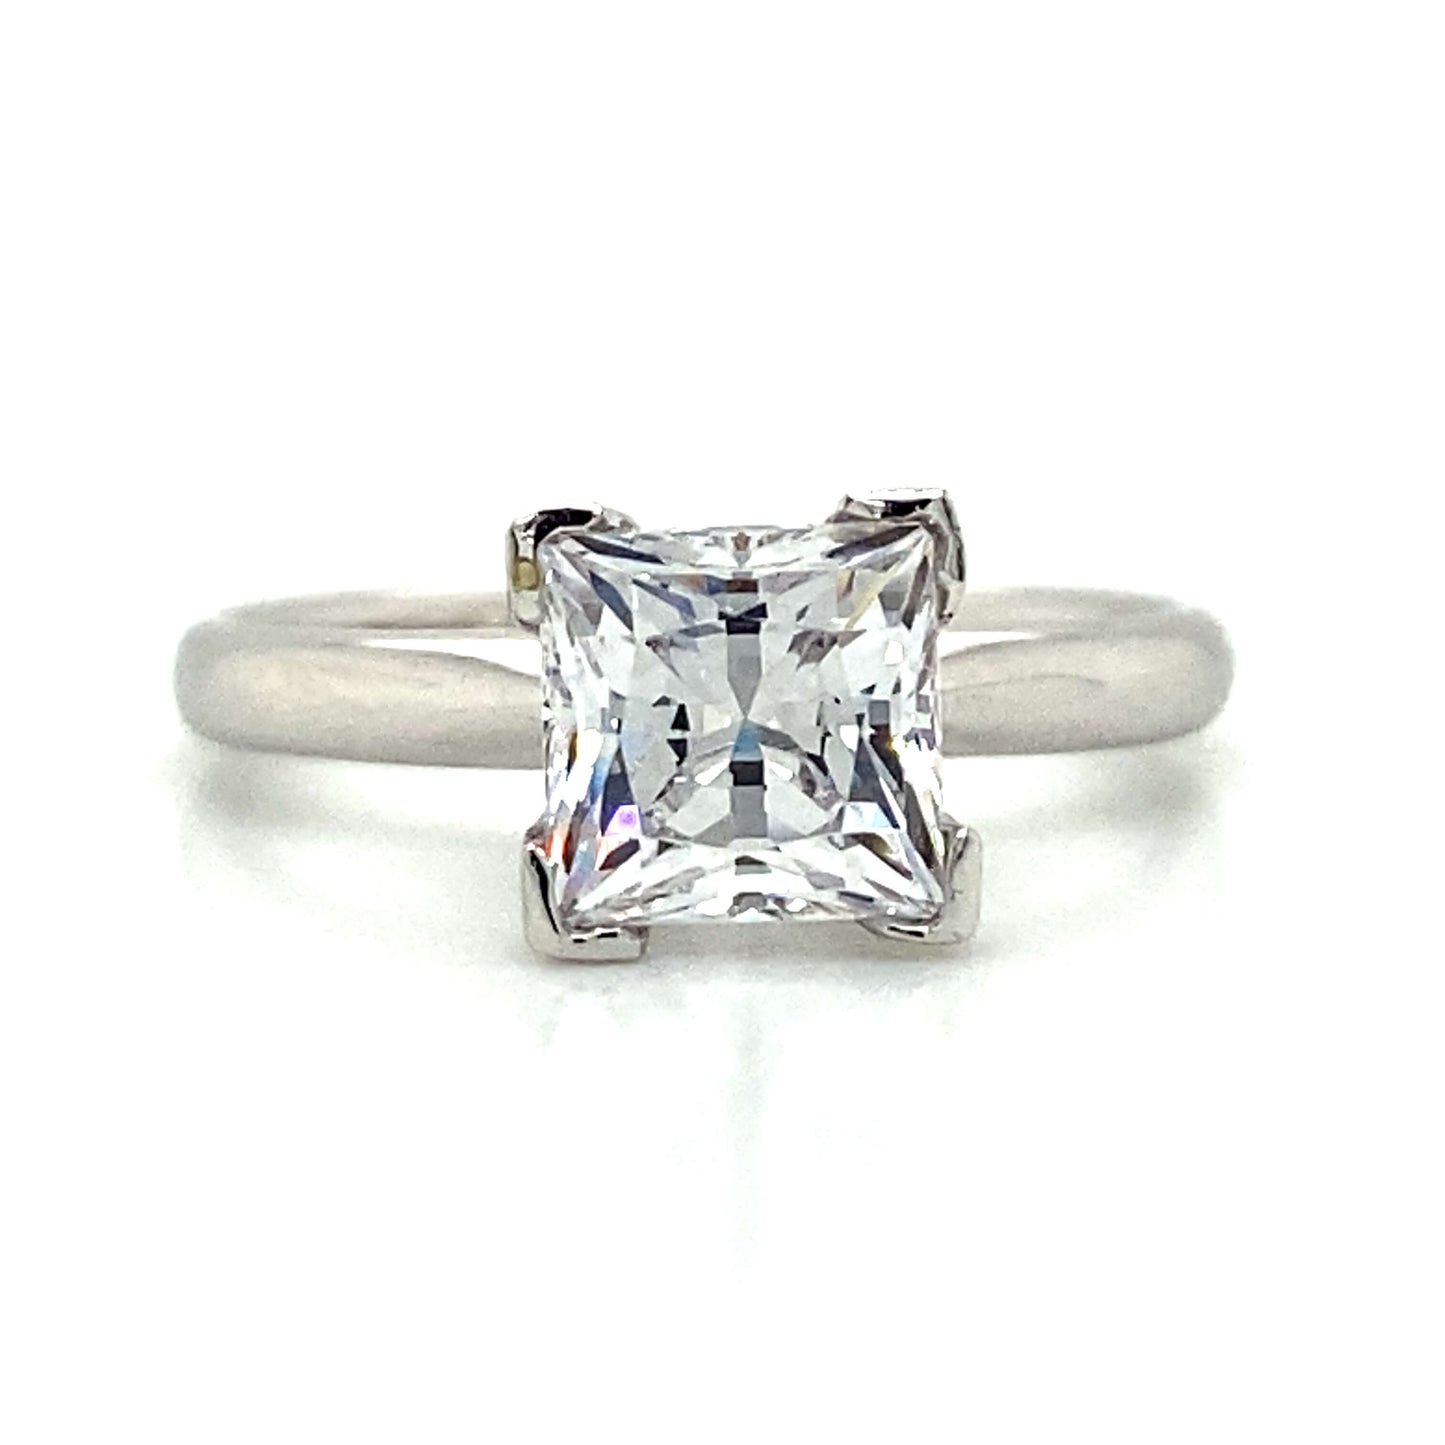 Solitaire Princess Shaped Egagement Ring in 14K White Gold